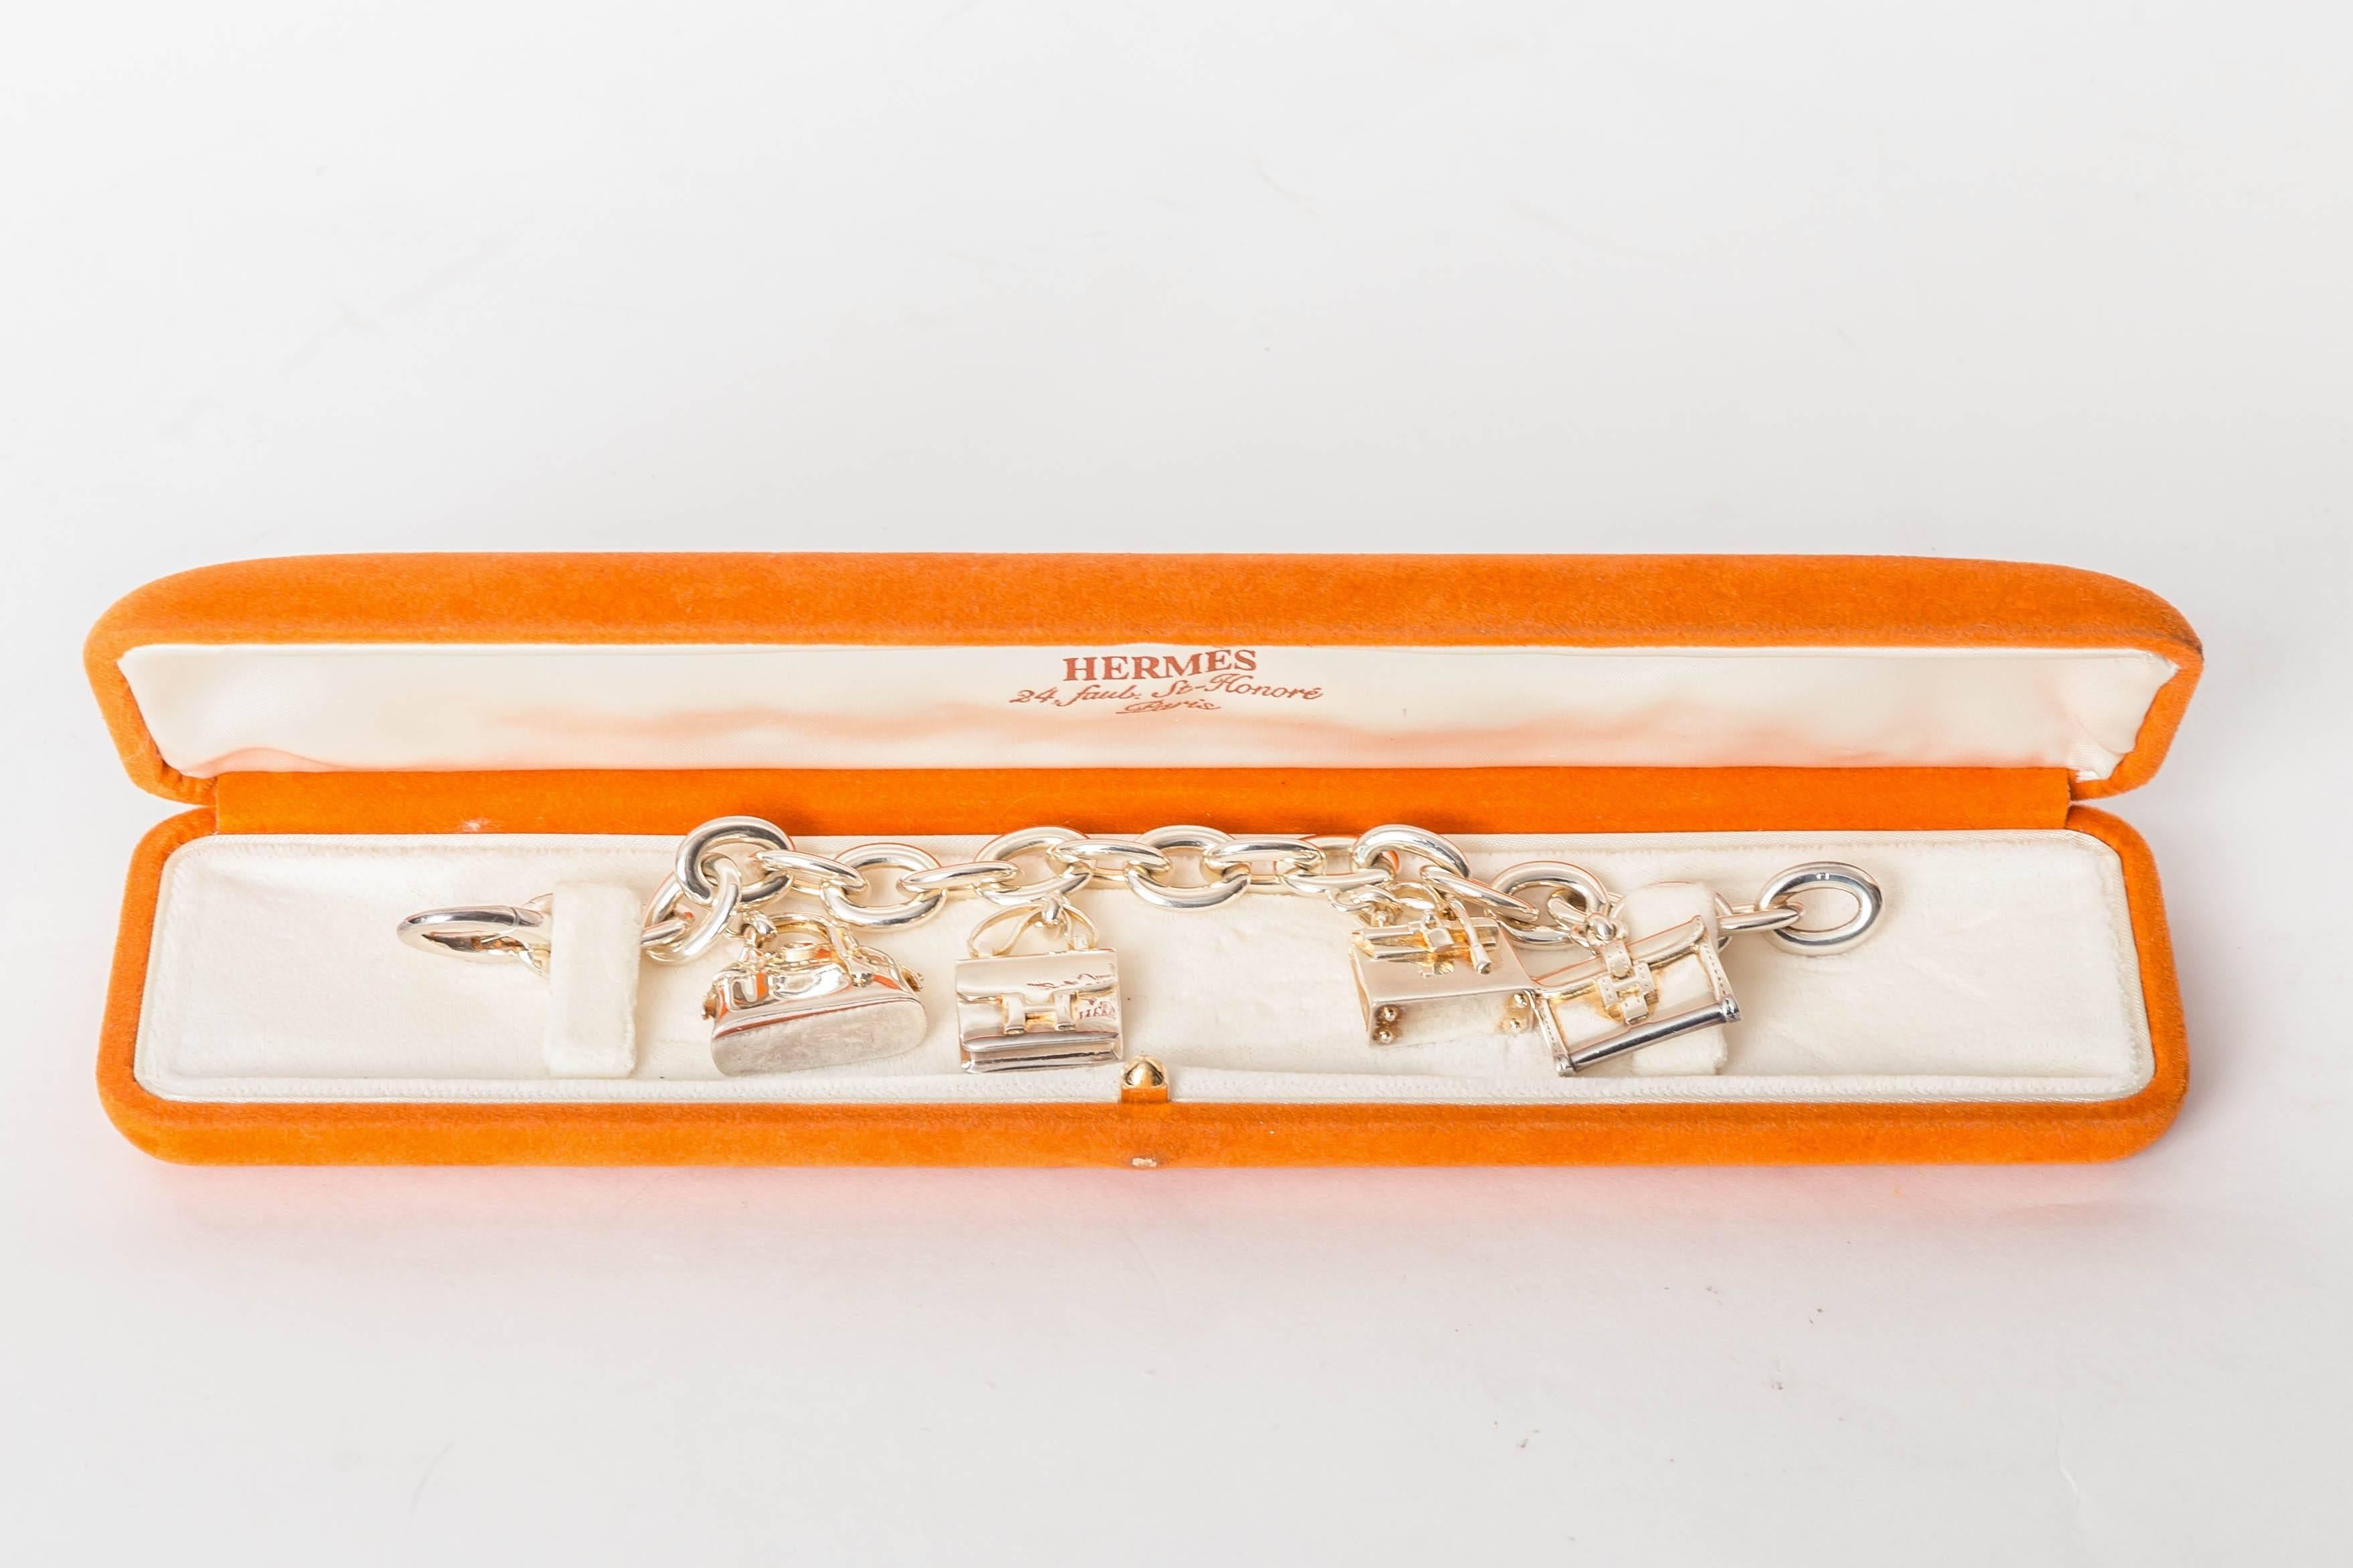 Rare Hermes Sterling Silver 4 Handbag Charm Bracelet with Gold Detail
Toggle Closure
Original Hermes Box is Included
Four Beautifully Crafted Hermes Handbag Charms Hang From This Beautiful Bracelet
This Sensational Bracelet Measures 7.5 Inches
